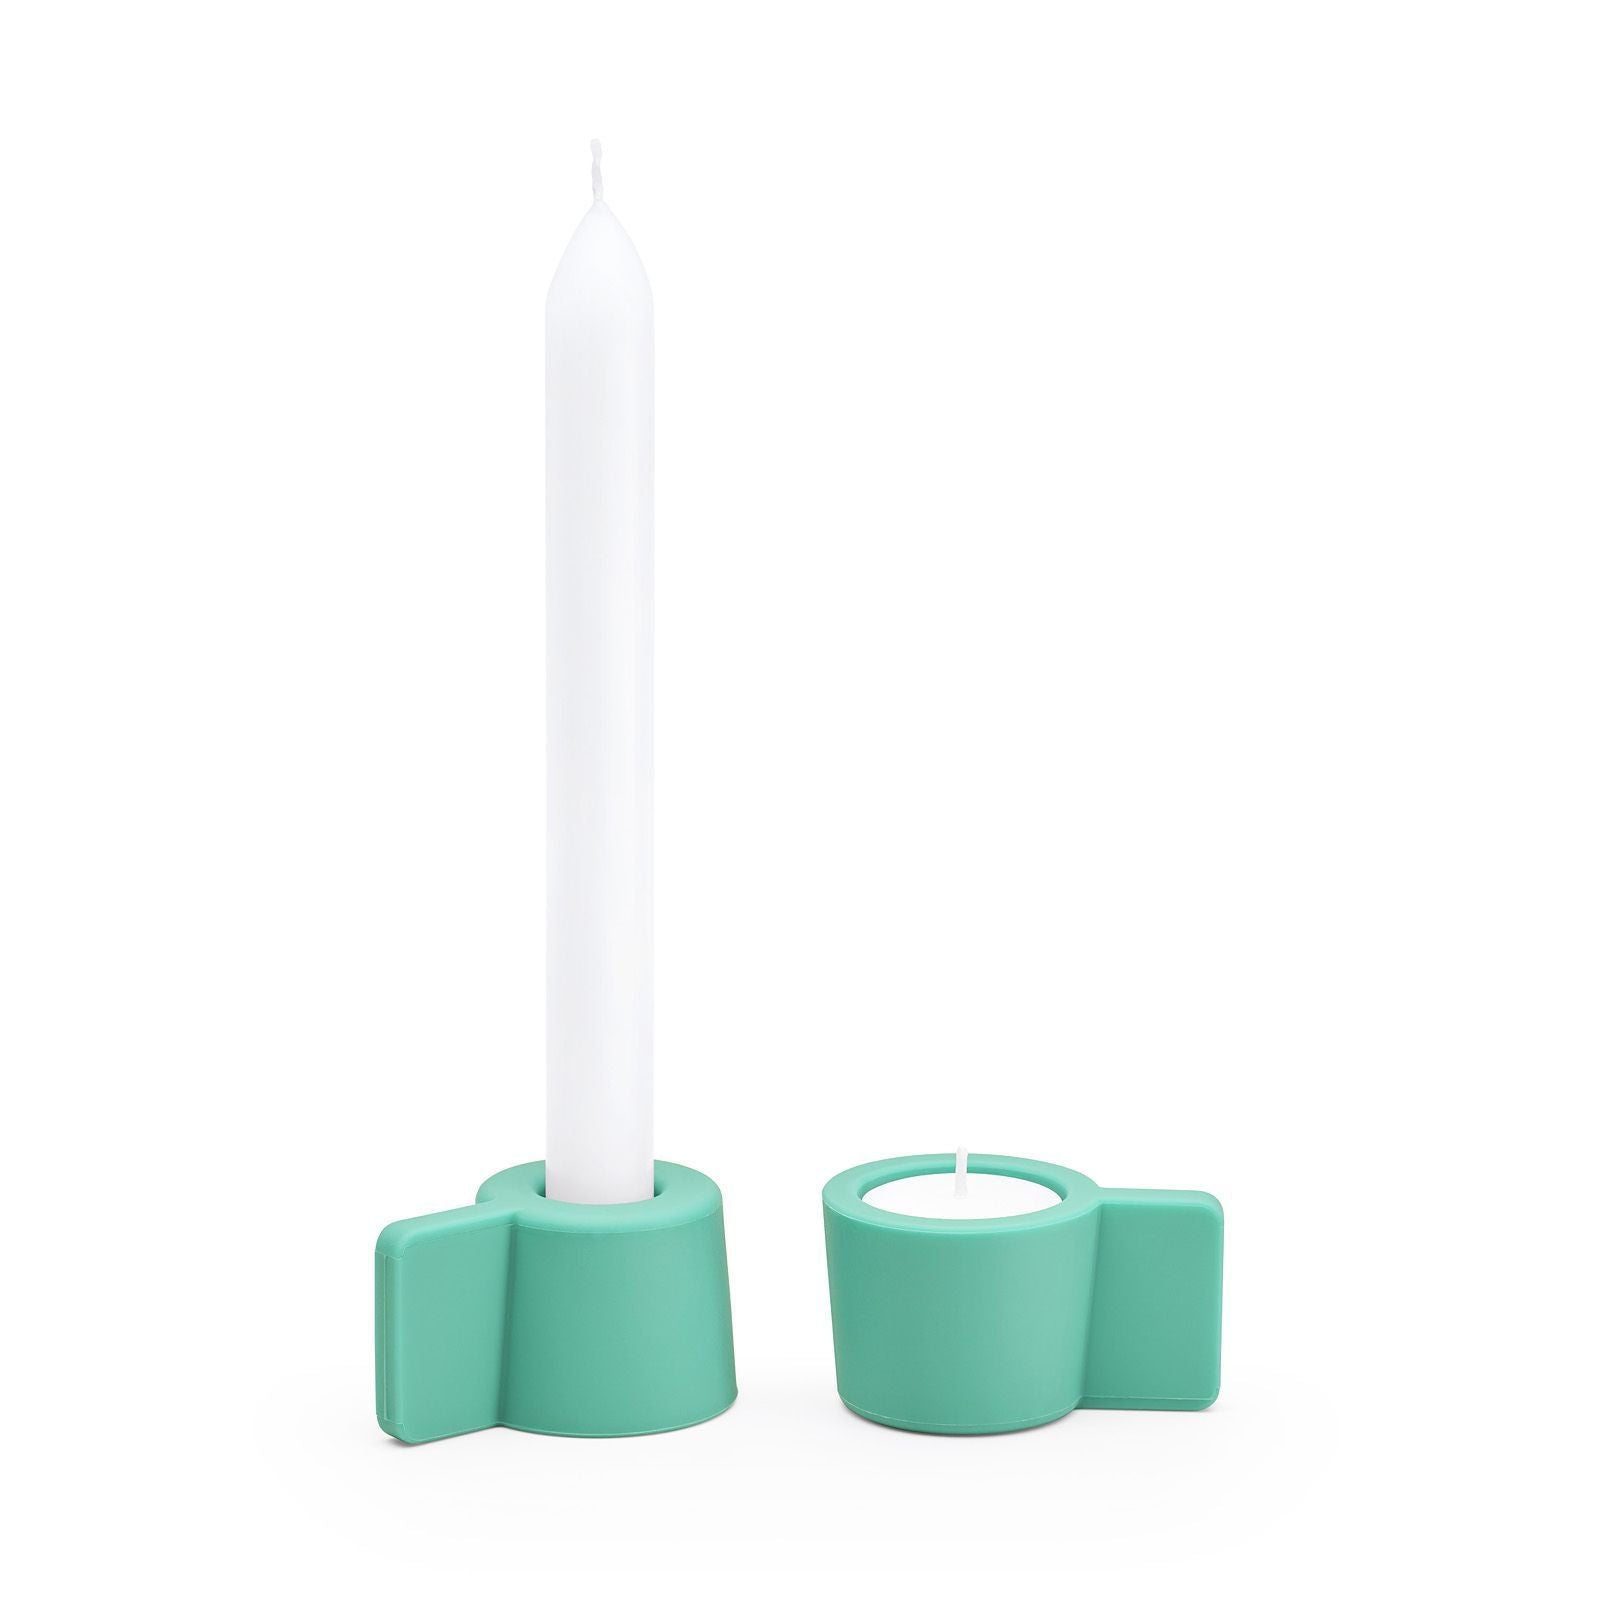 Puik Silly Candle Holder Set Of 2, Mint Green